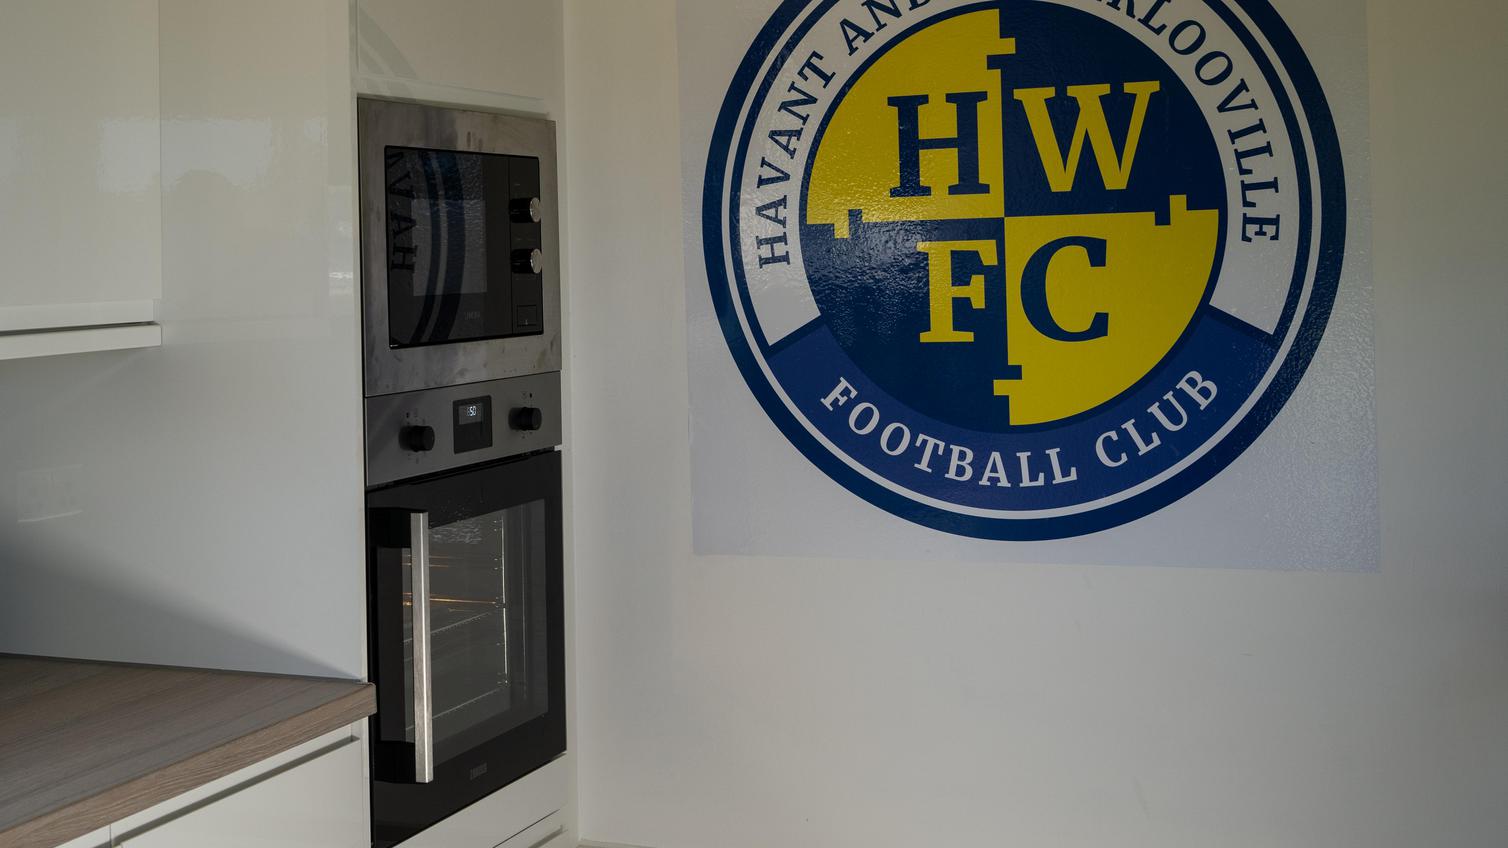 The new cooking facilities at Hawks Community Youth FC thanks to the Game Changer Programme from Howdens